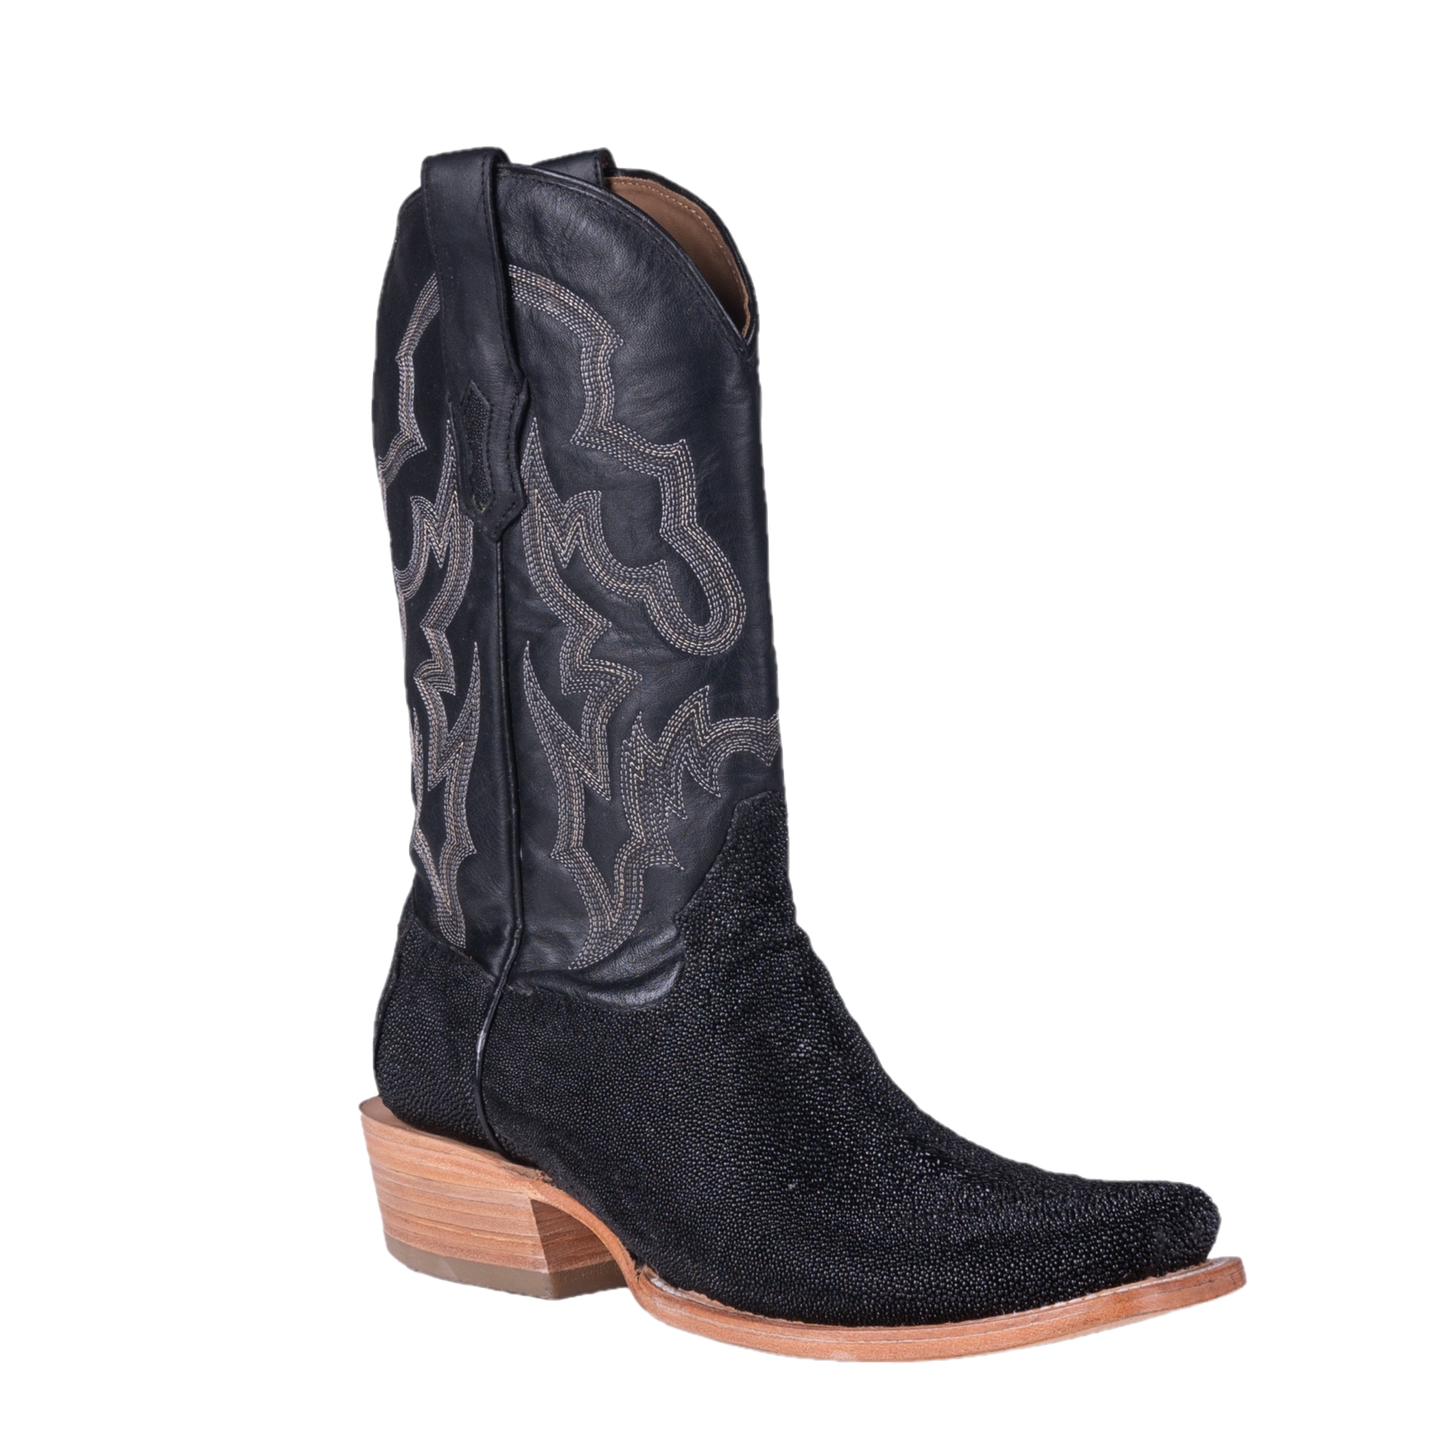 Corral Men's Stingray Black Embroidered Horseman Toe Boots A4423